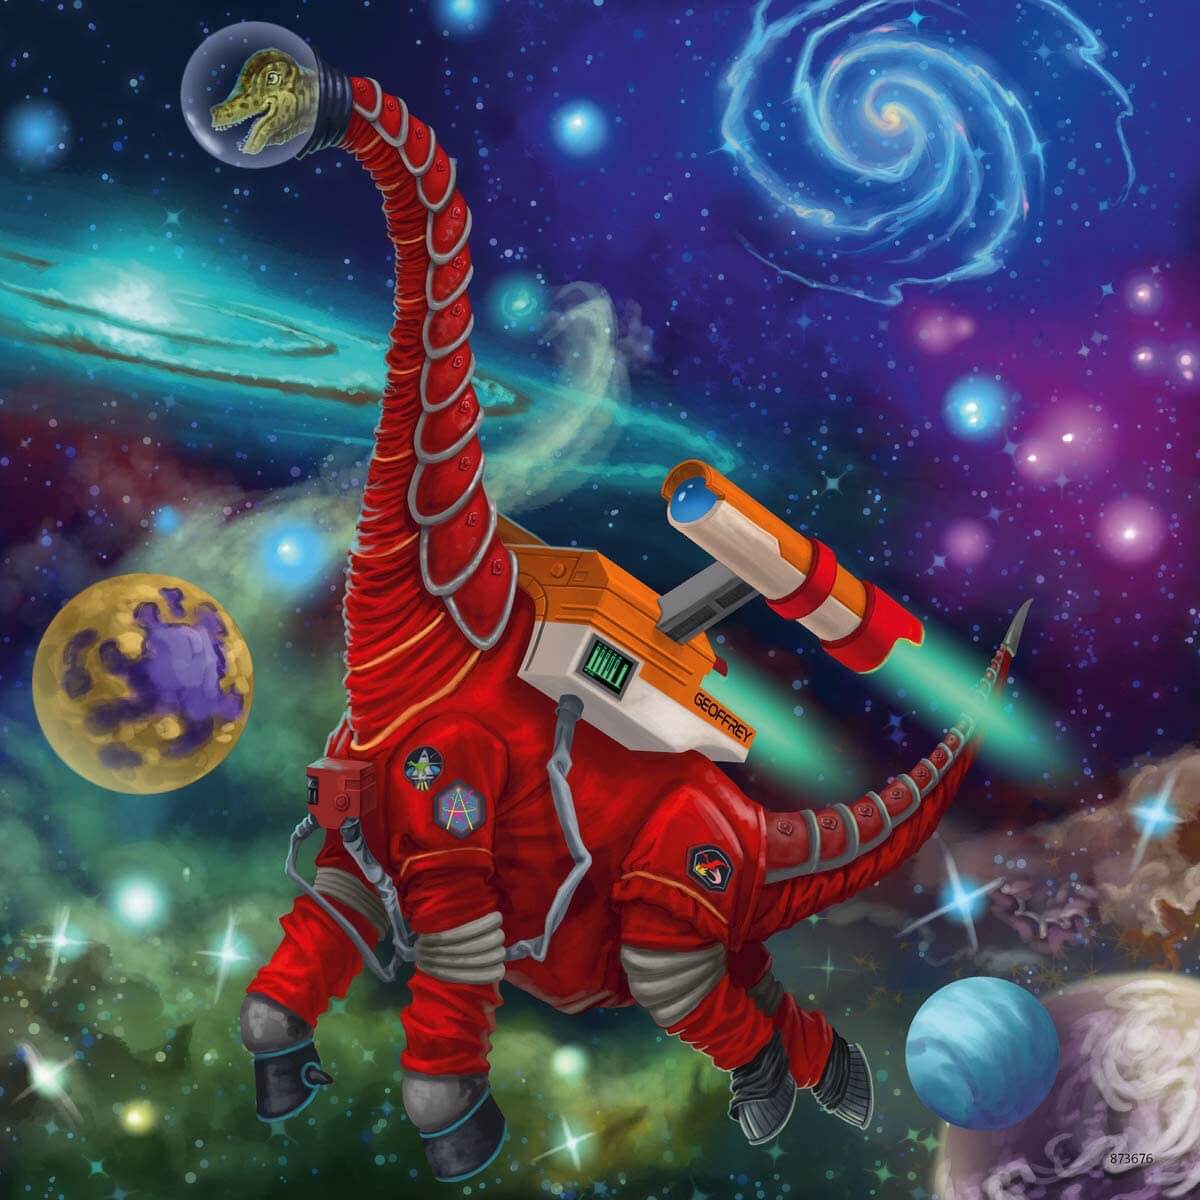 Ravensburger Dinosaurs in Space 3 x 49 Piece Puzzle